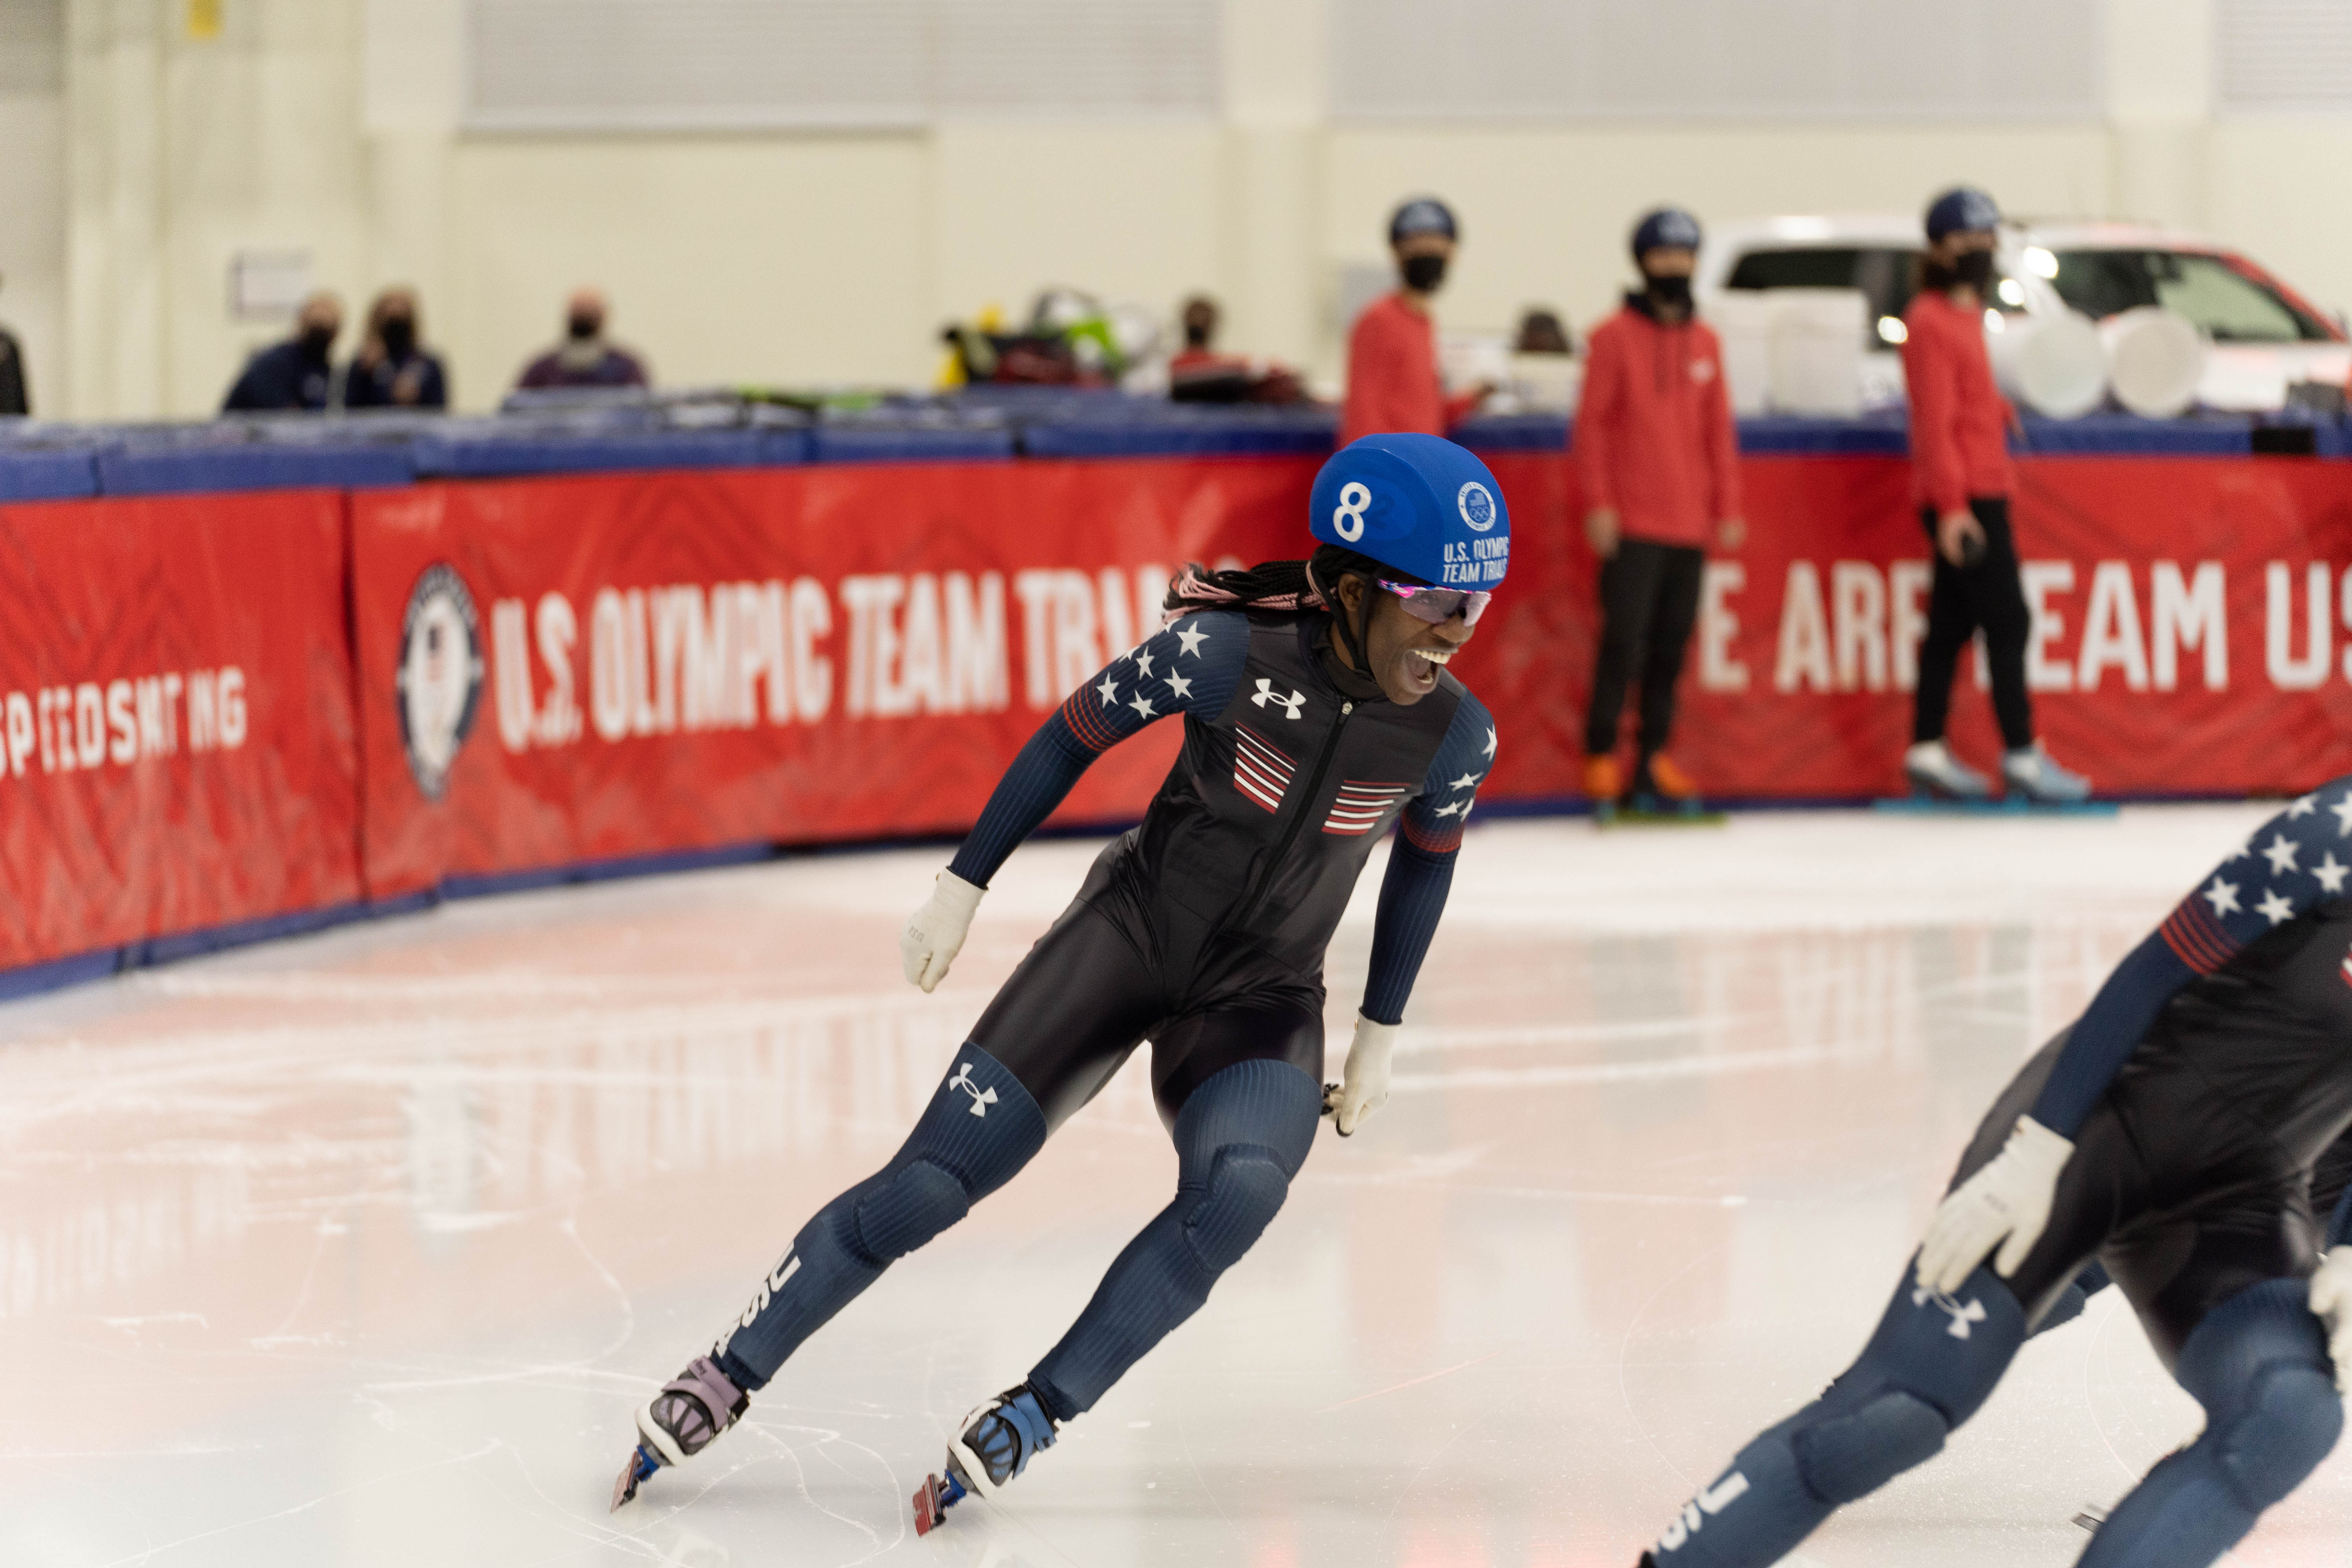 Maame Biney, South Lakes High graduate, will make her second Winter Olympics appearance on the U.S. Women's speed skating team.